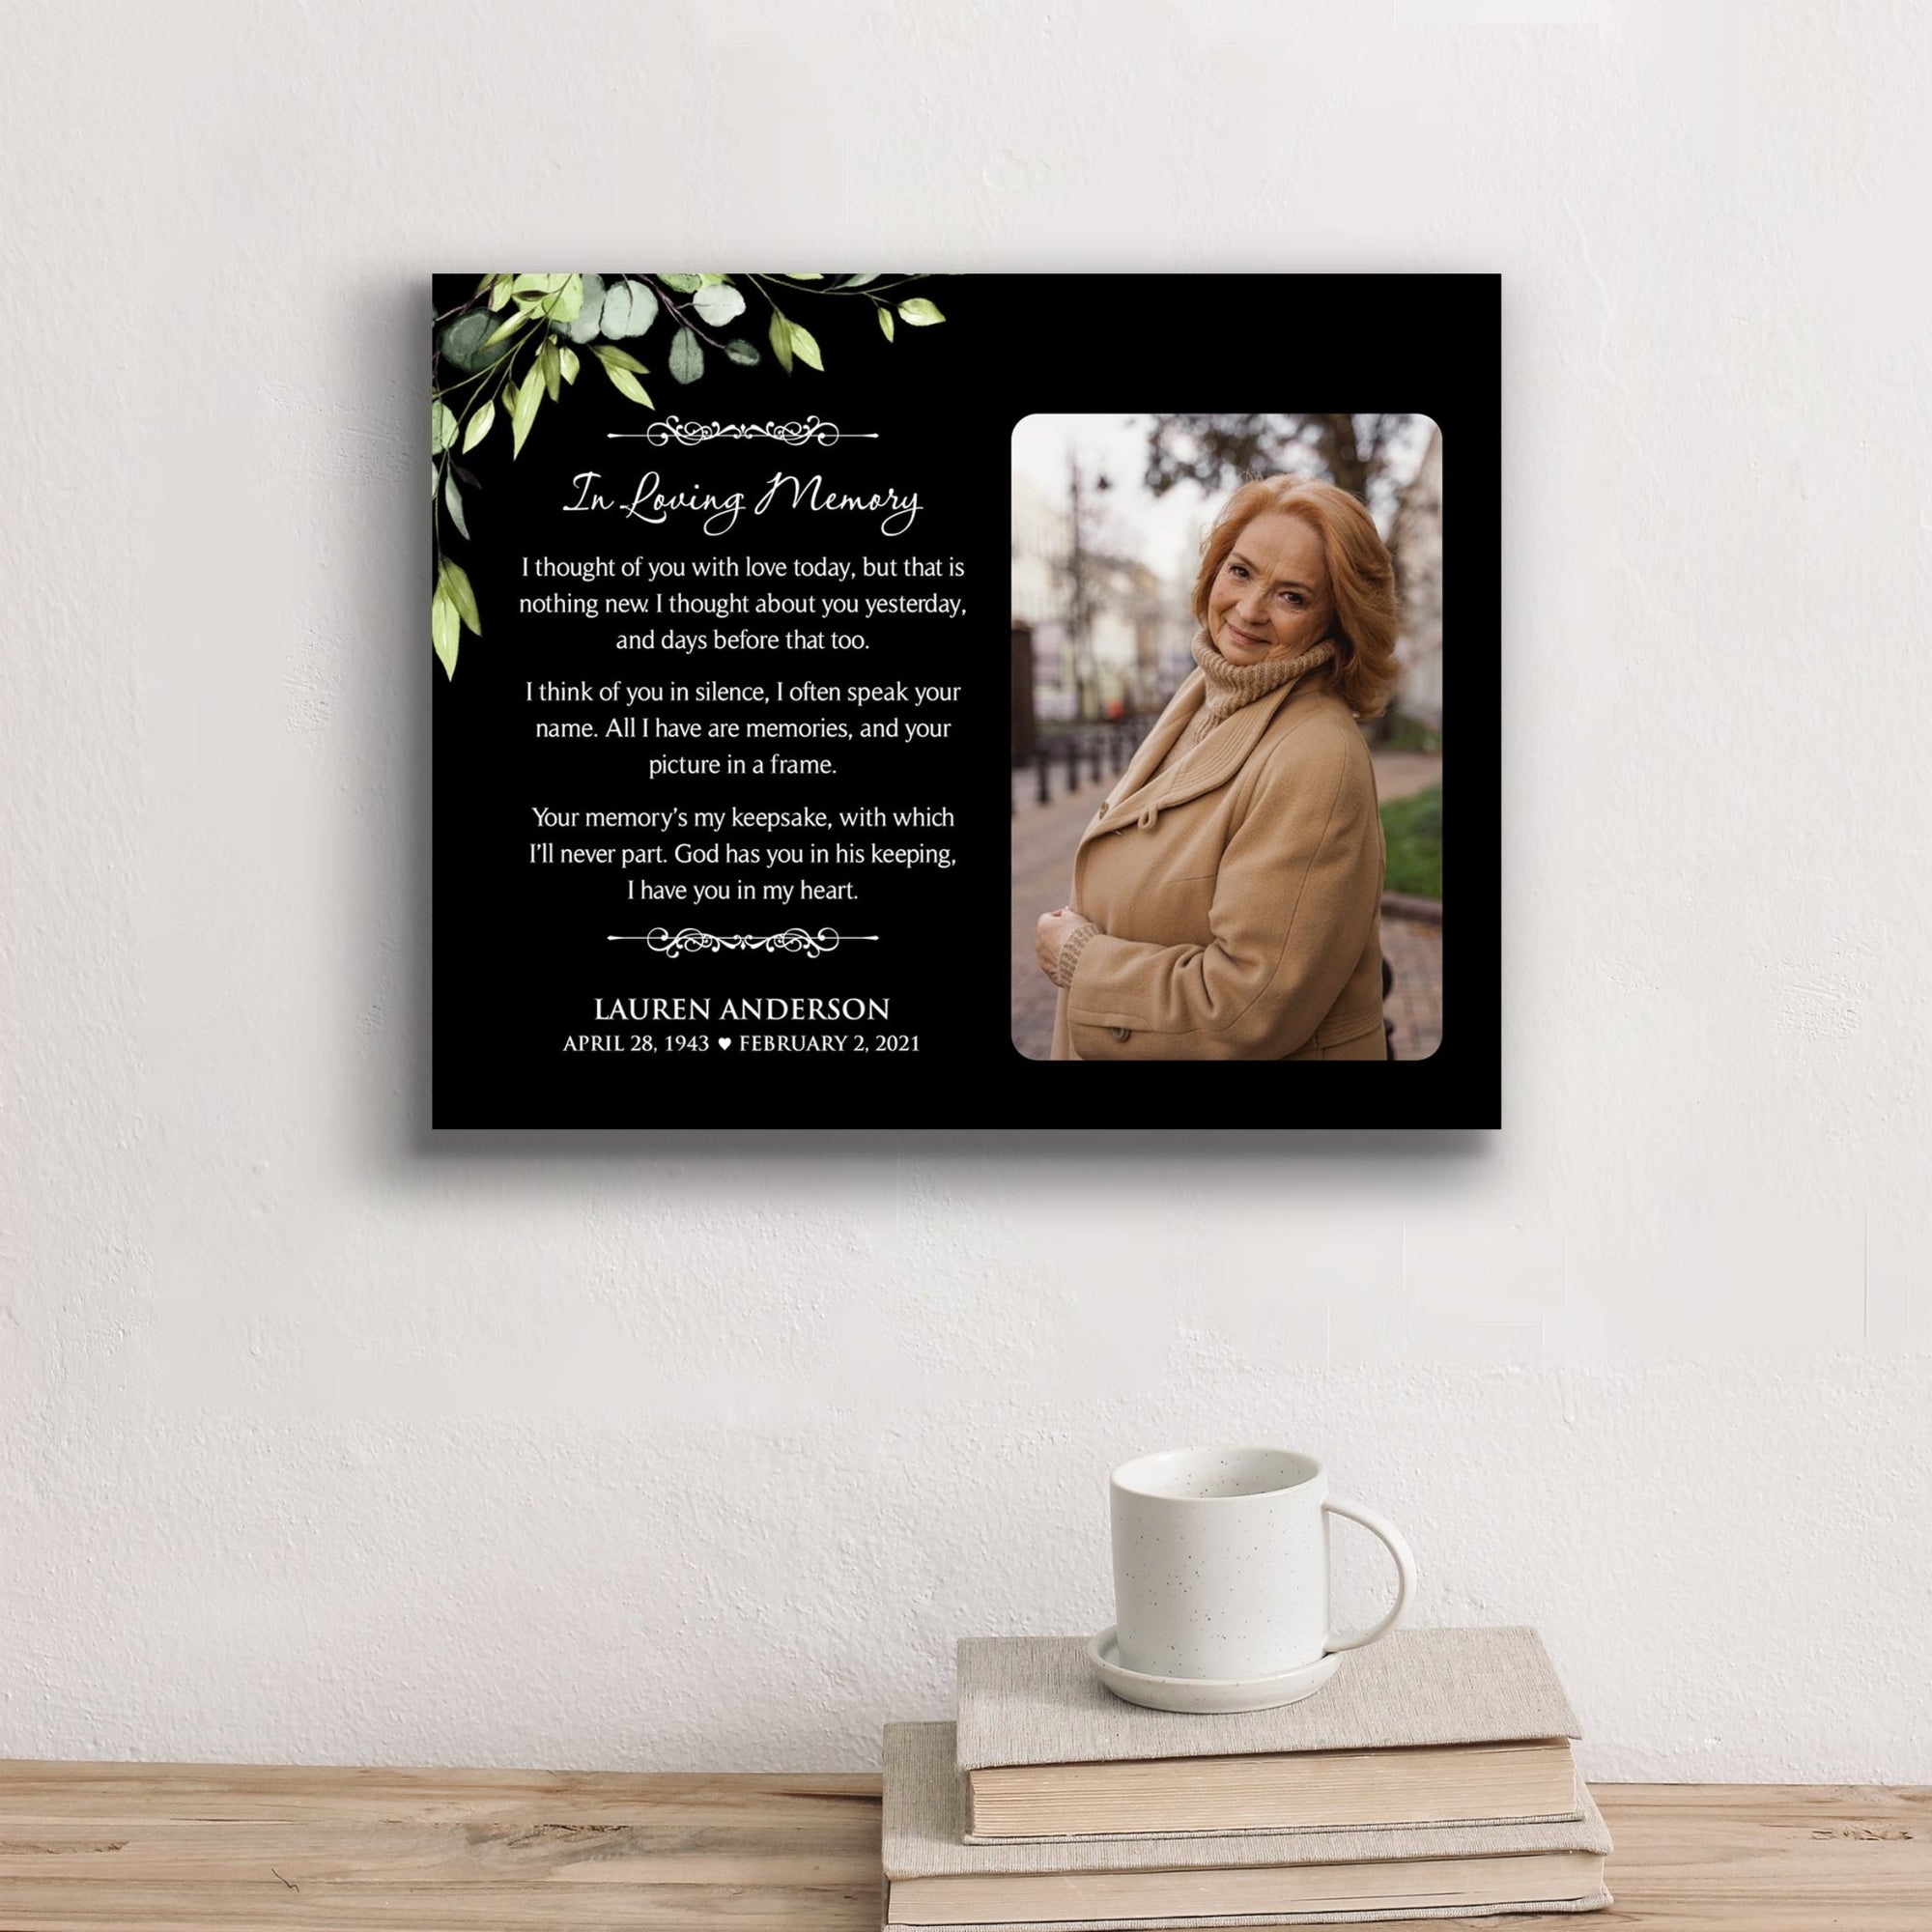 Personalized Human Memorial Black Photo & Inspirational Verse Bereavement Wall Décor & Sympathy Gift Ideas - In Loving Memory - LifeSong Milestones